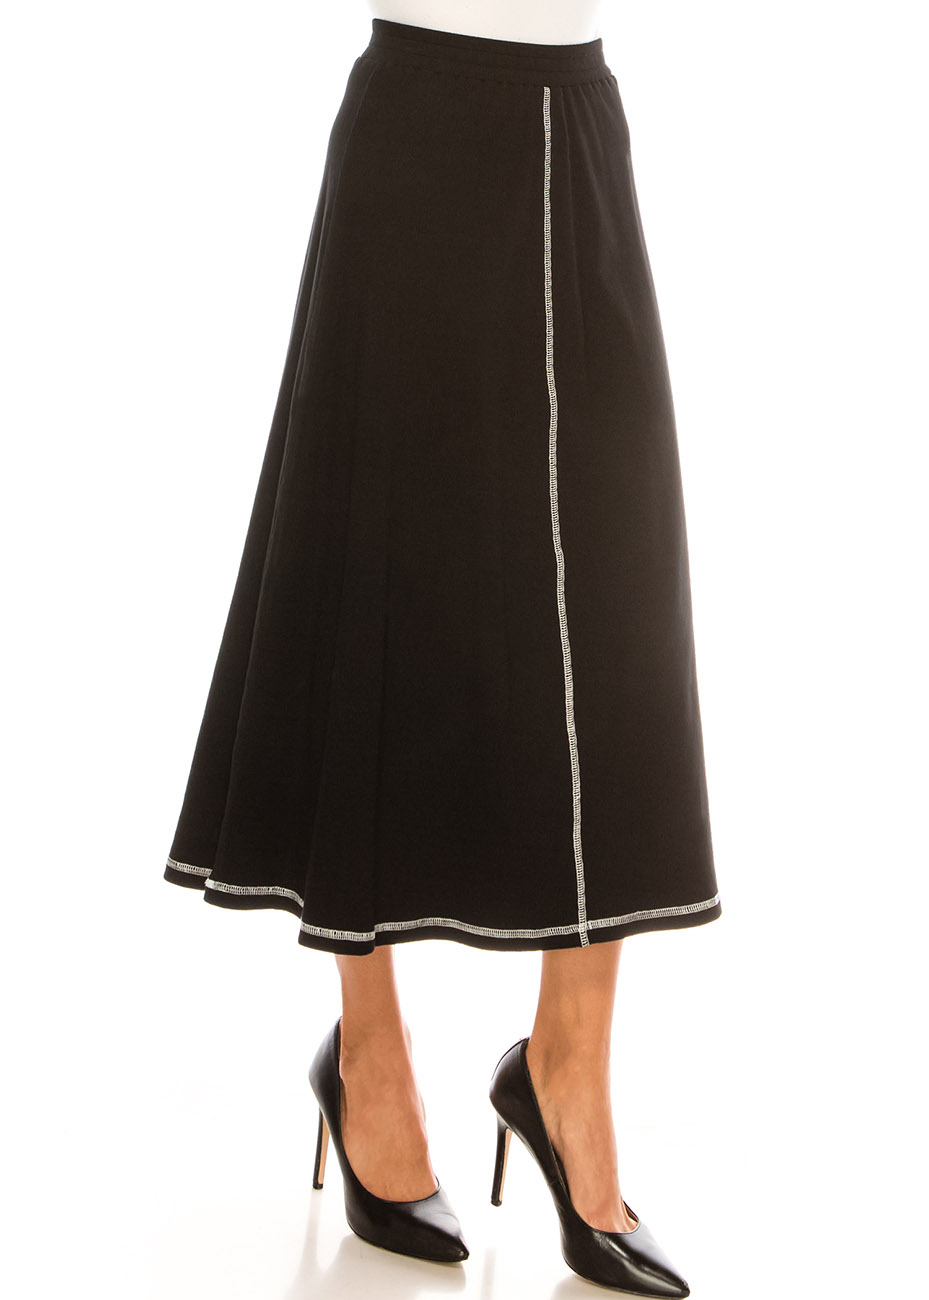 Chic Onyx with White Detail Skirt